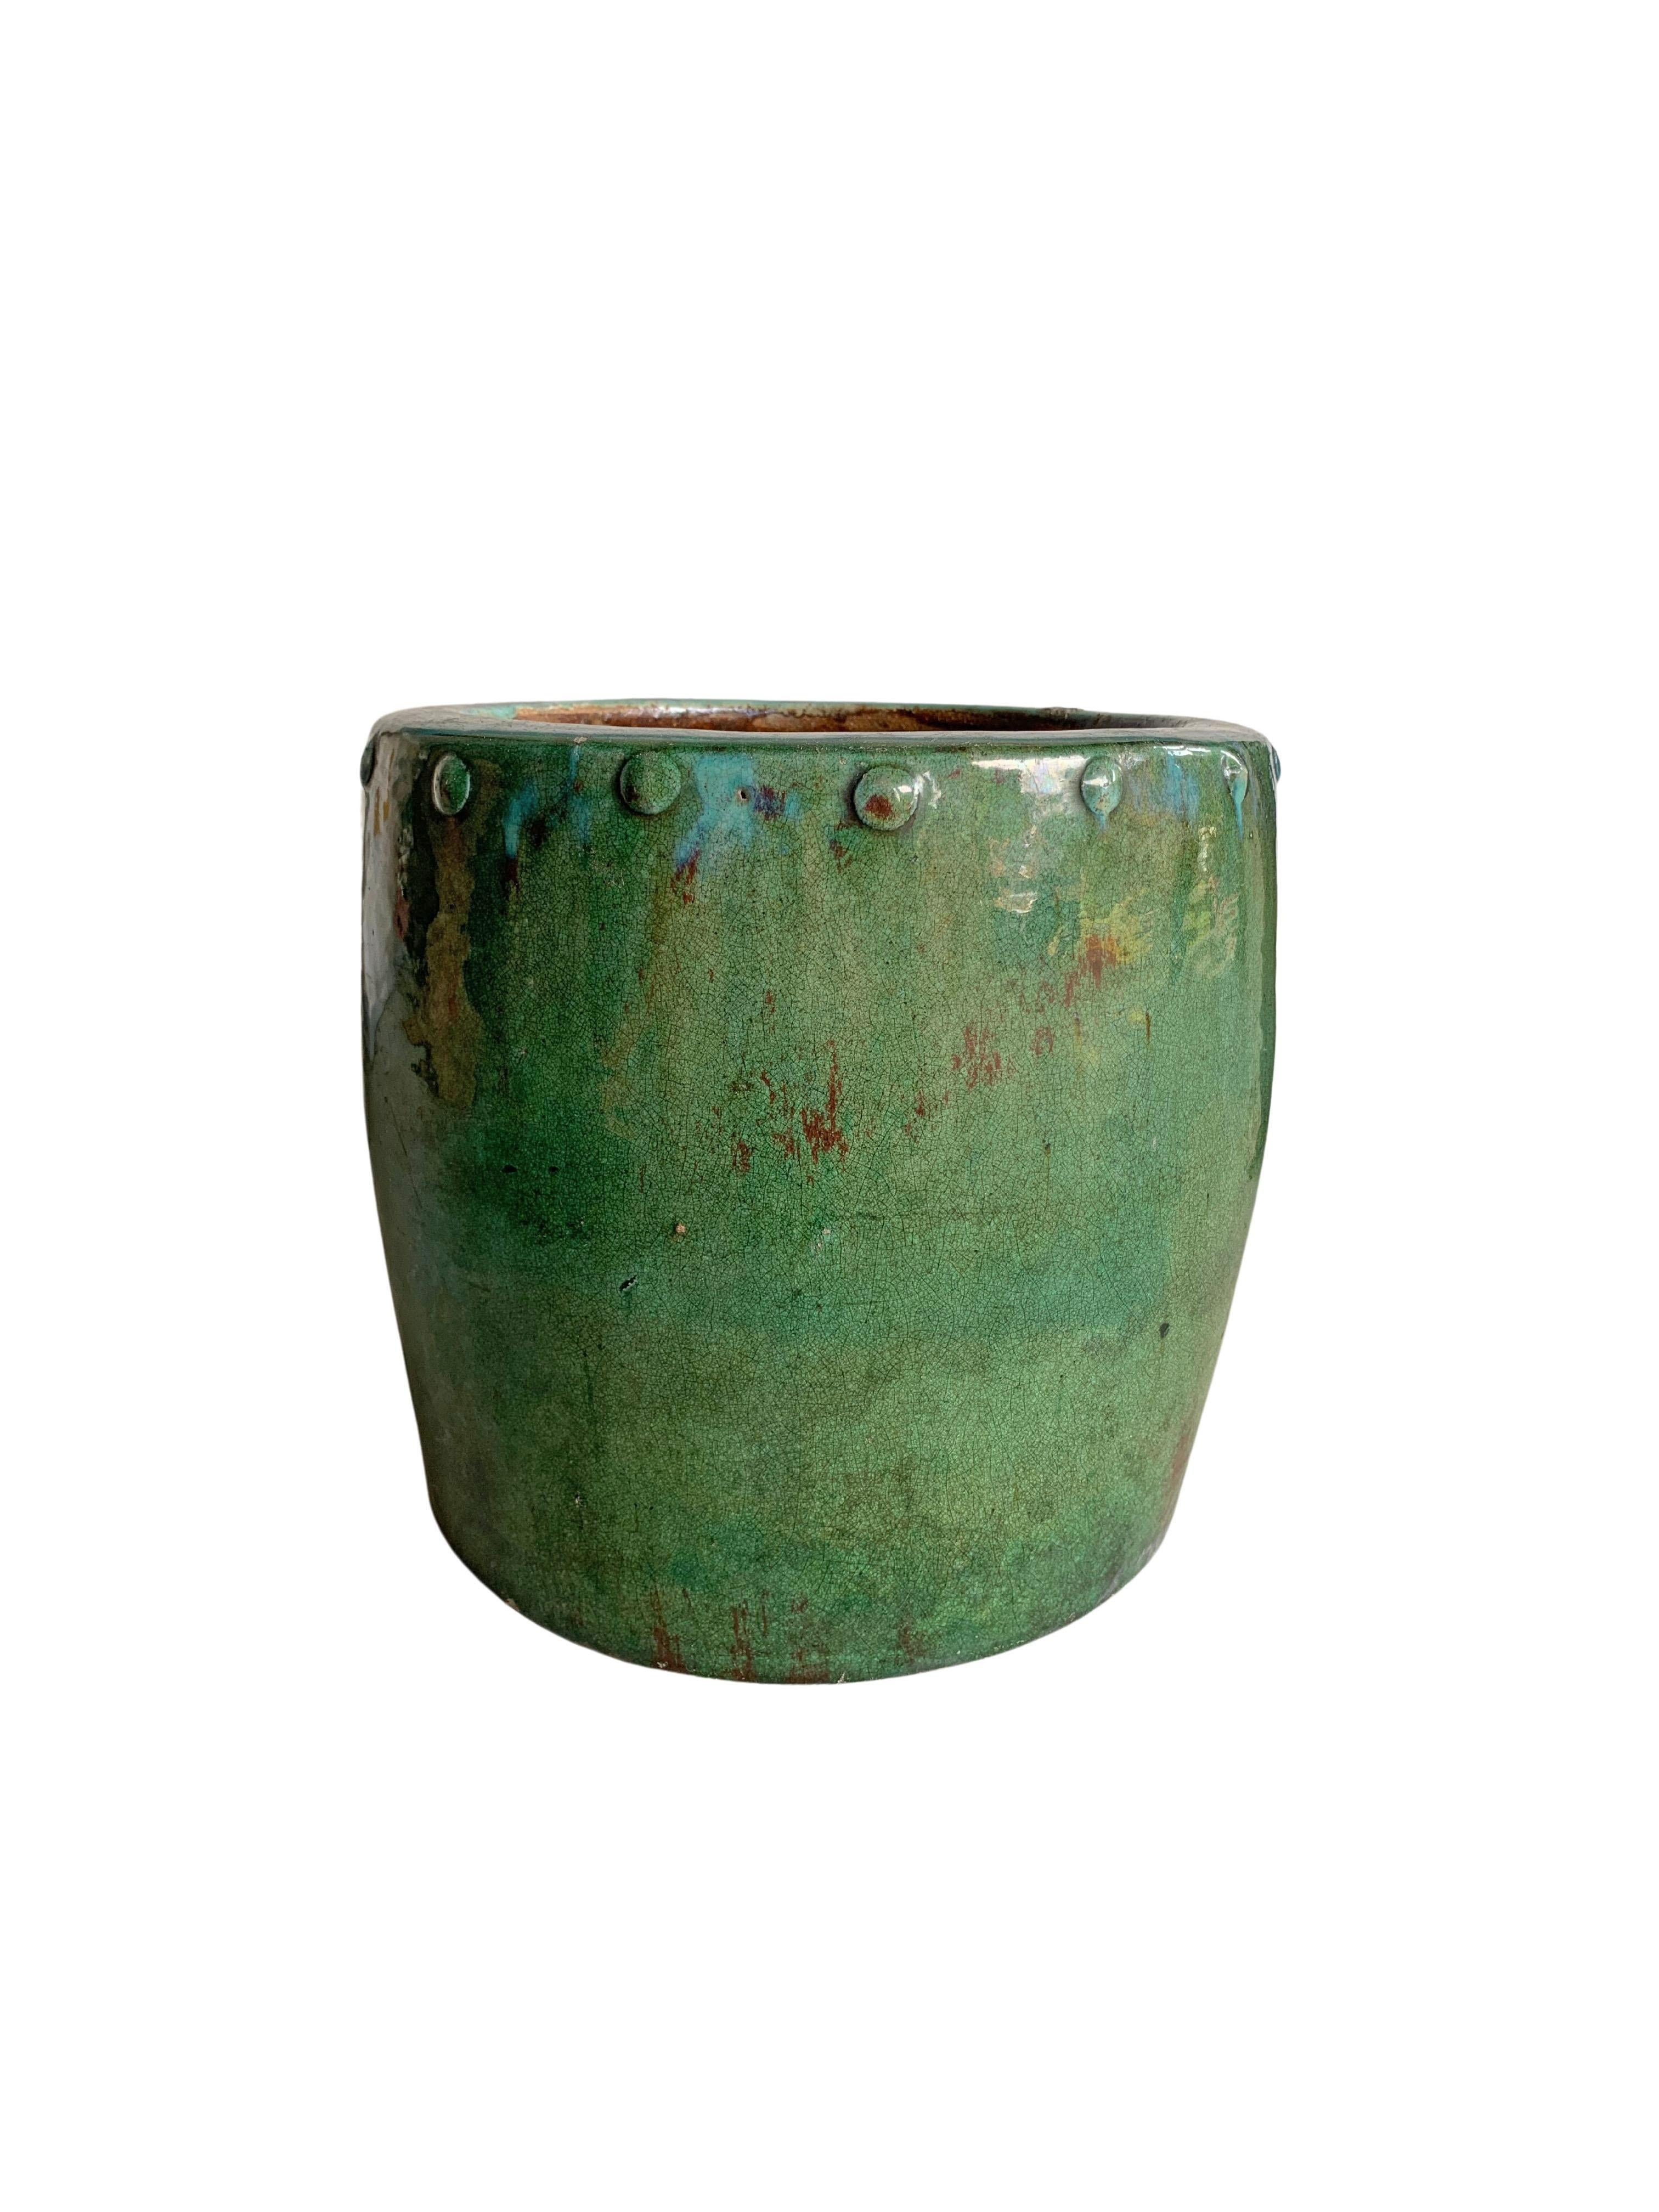 Chinese Green Glazed Ceramic Oil Storage Jar / Planter, c. 1950 In Good Condition For Sale In Jimbaran, Bali